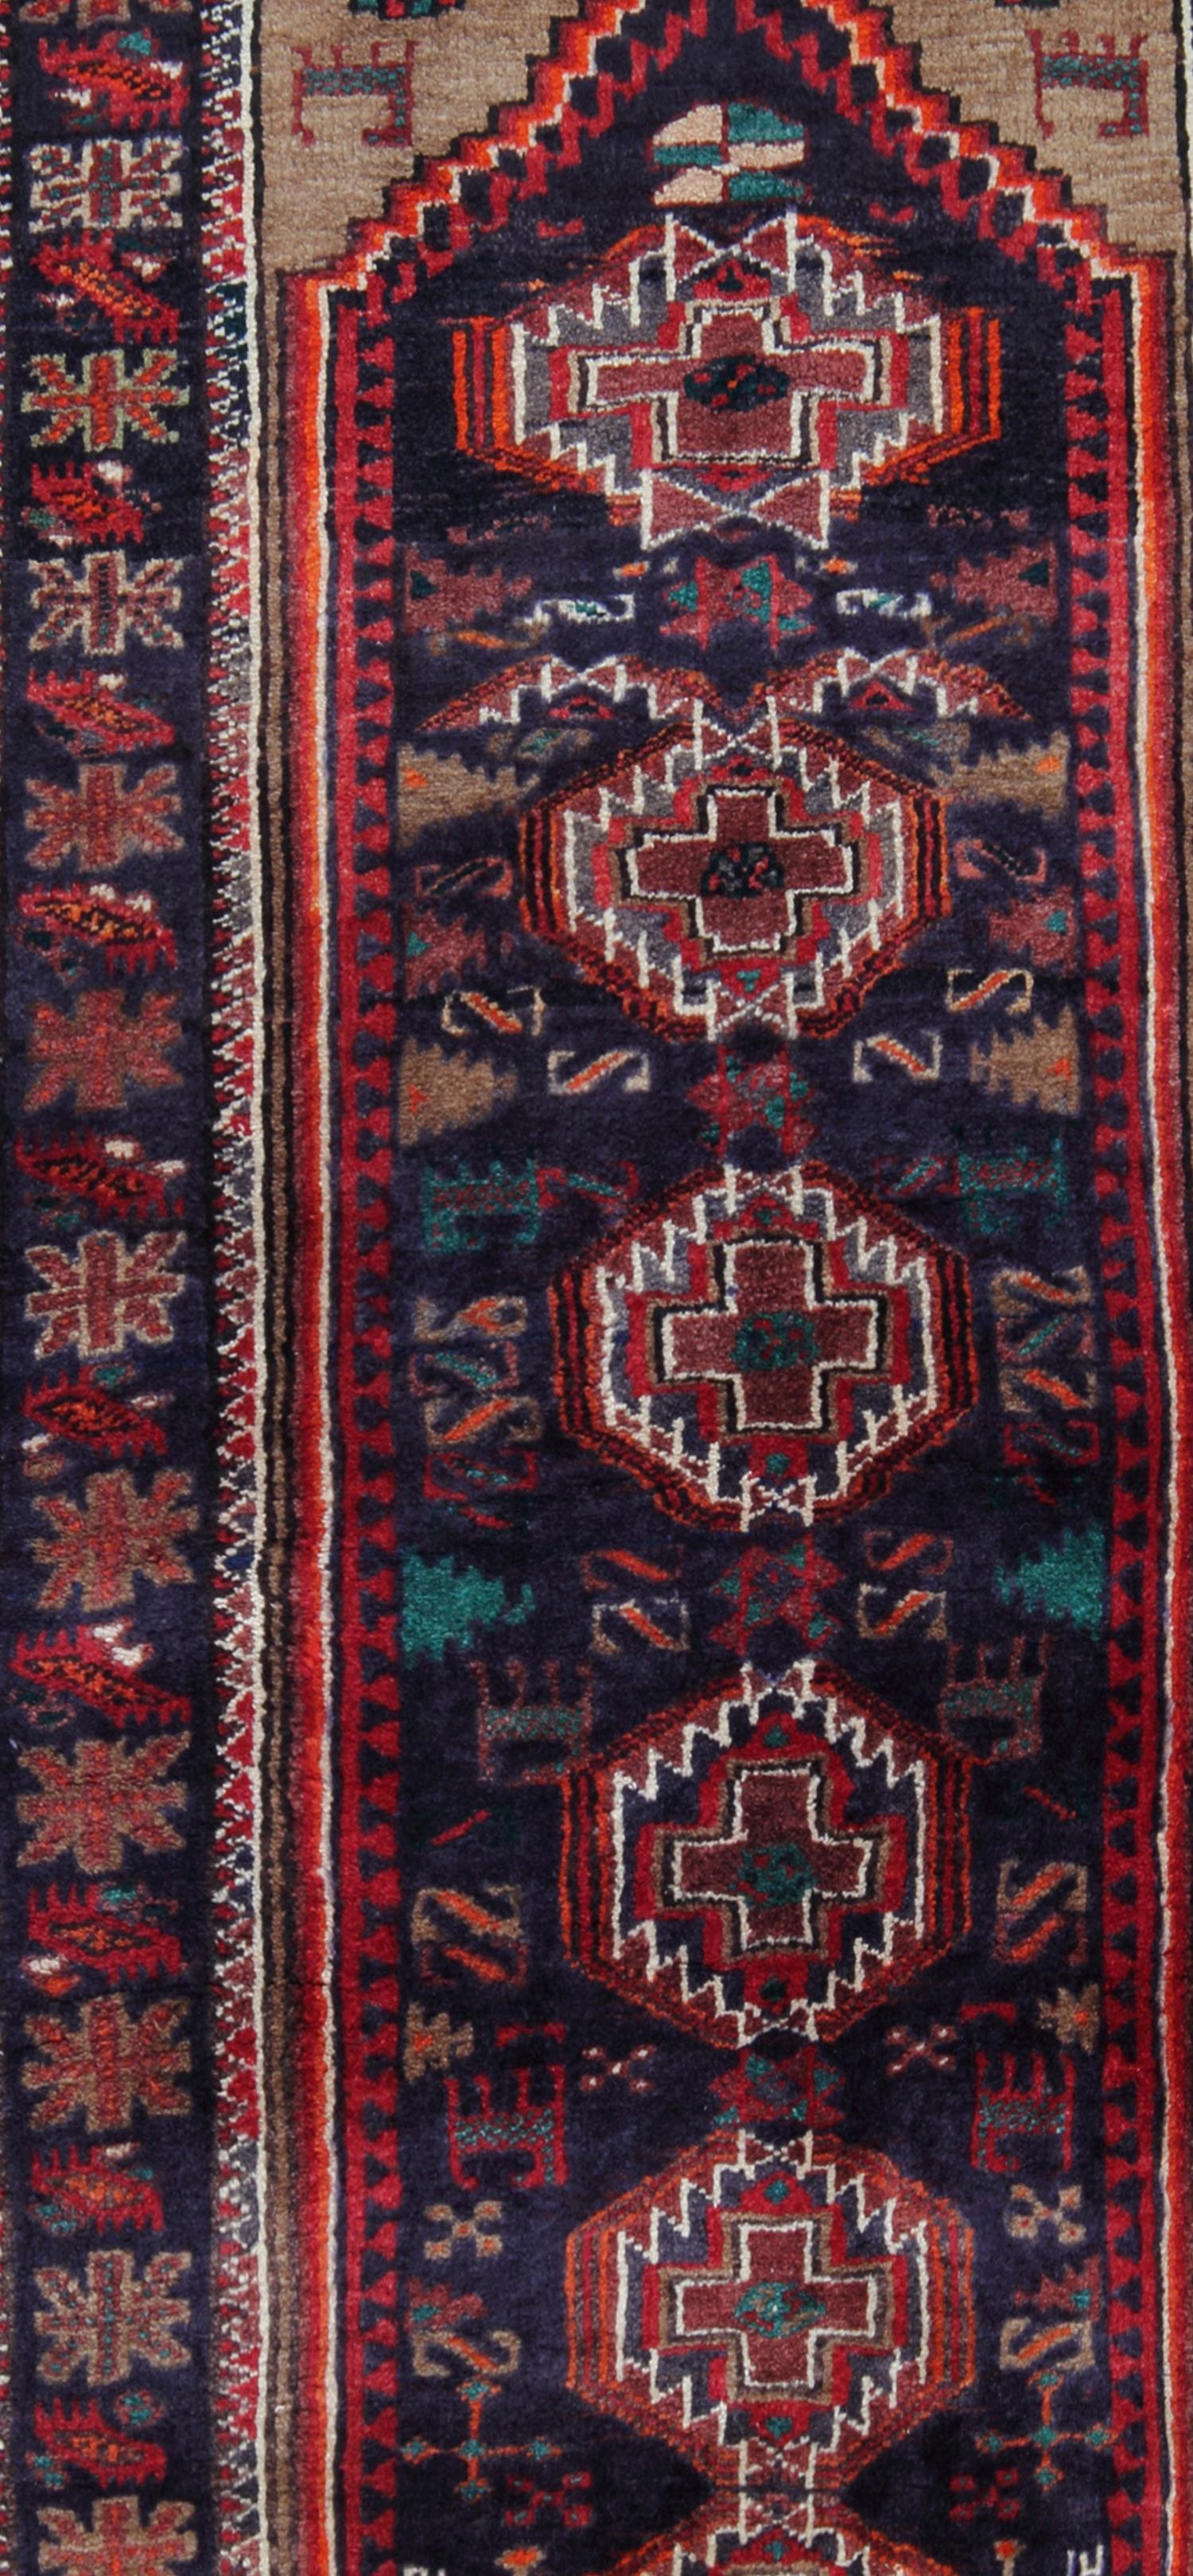 This vintage carpet was constructed by hand with fine organic materials. Woven with a traditional design and colour palette. Tribal medallions have been woven through the centre in red, brown and white accents on deep blue background, with a rich